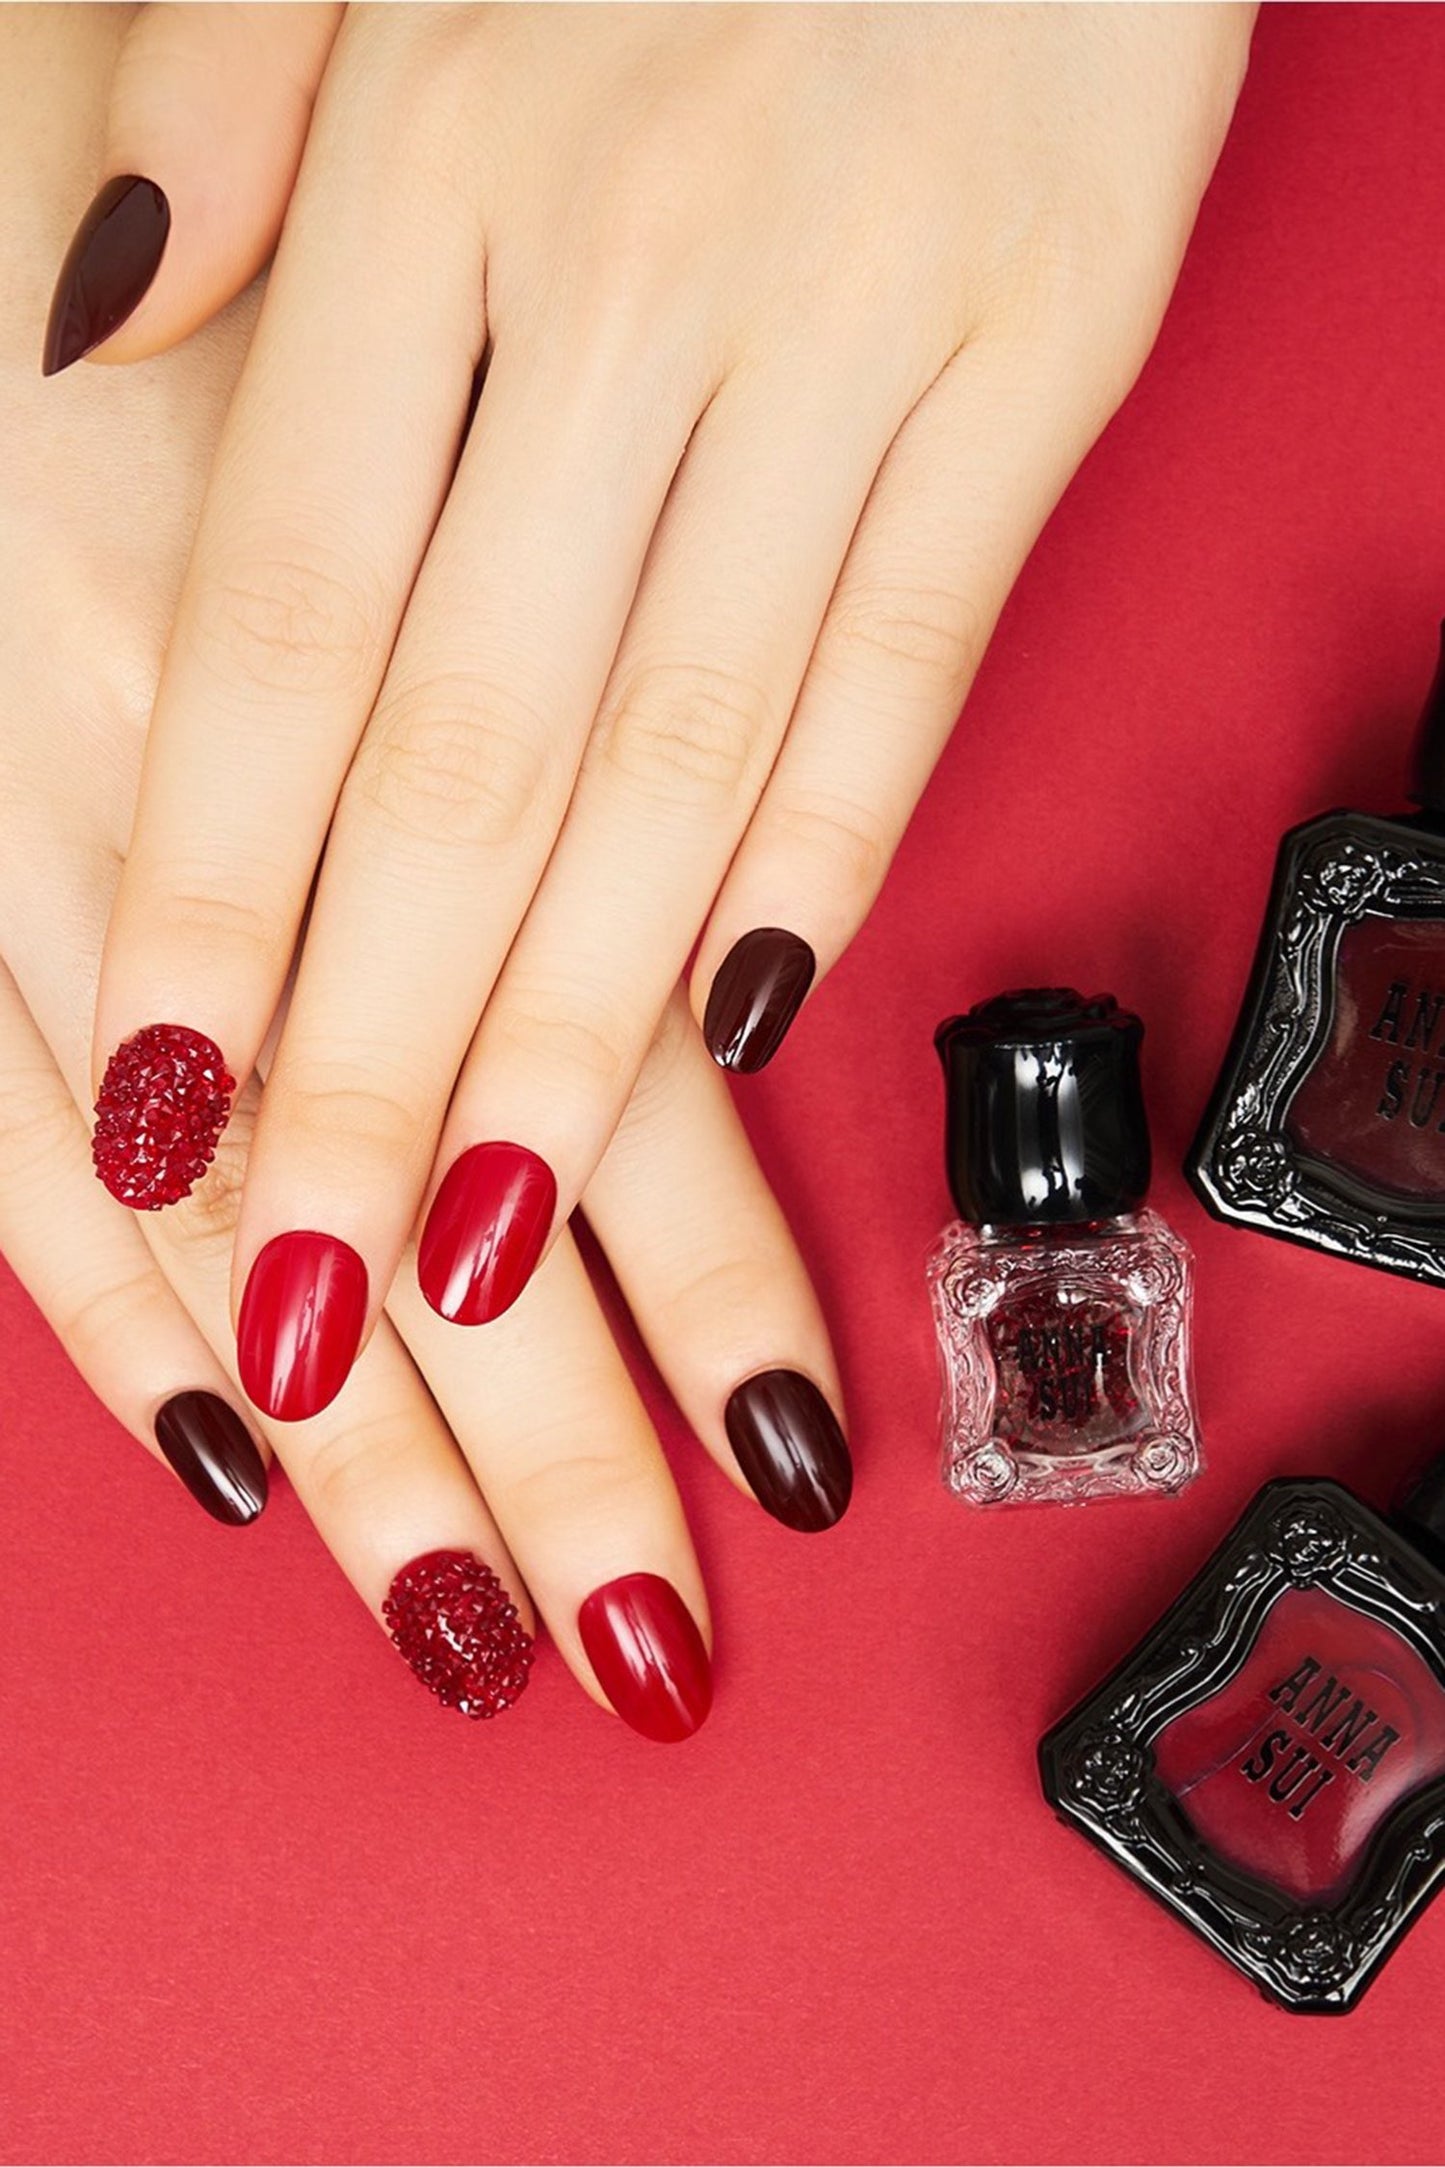 Hands with Nail Polish ANNA RED and DARK CHERRY color, Anna Sui bottle, black container